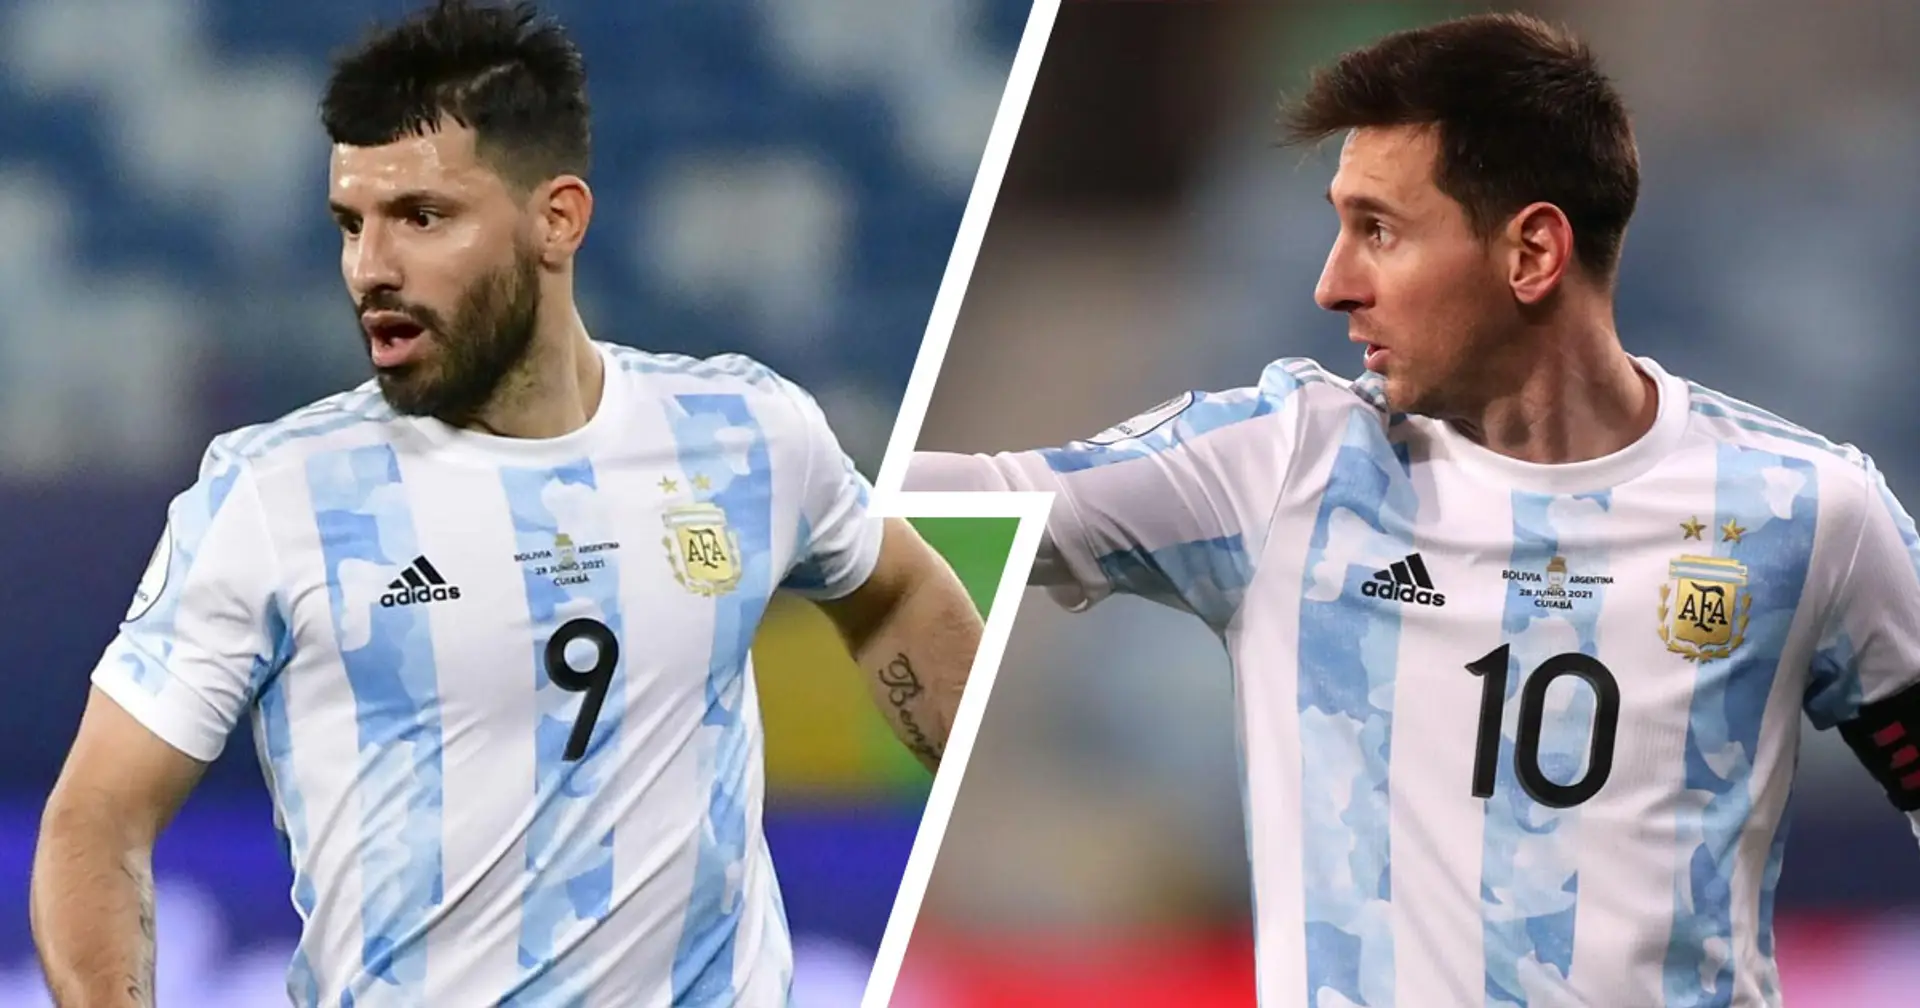 Argentina advance to Copa America semi-finals as Messi registers goal and 2 assists